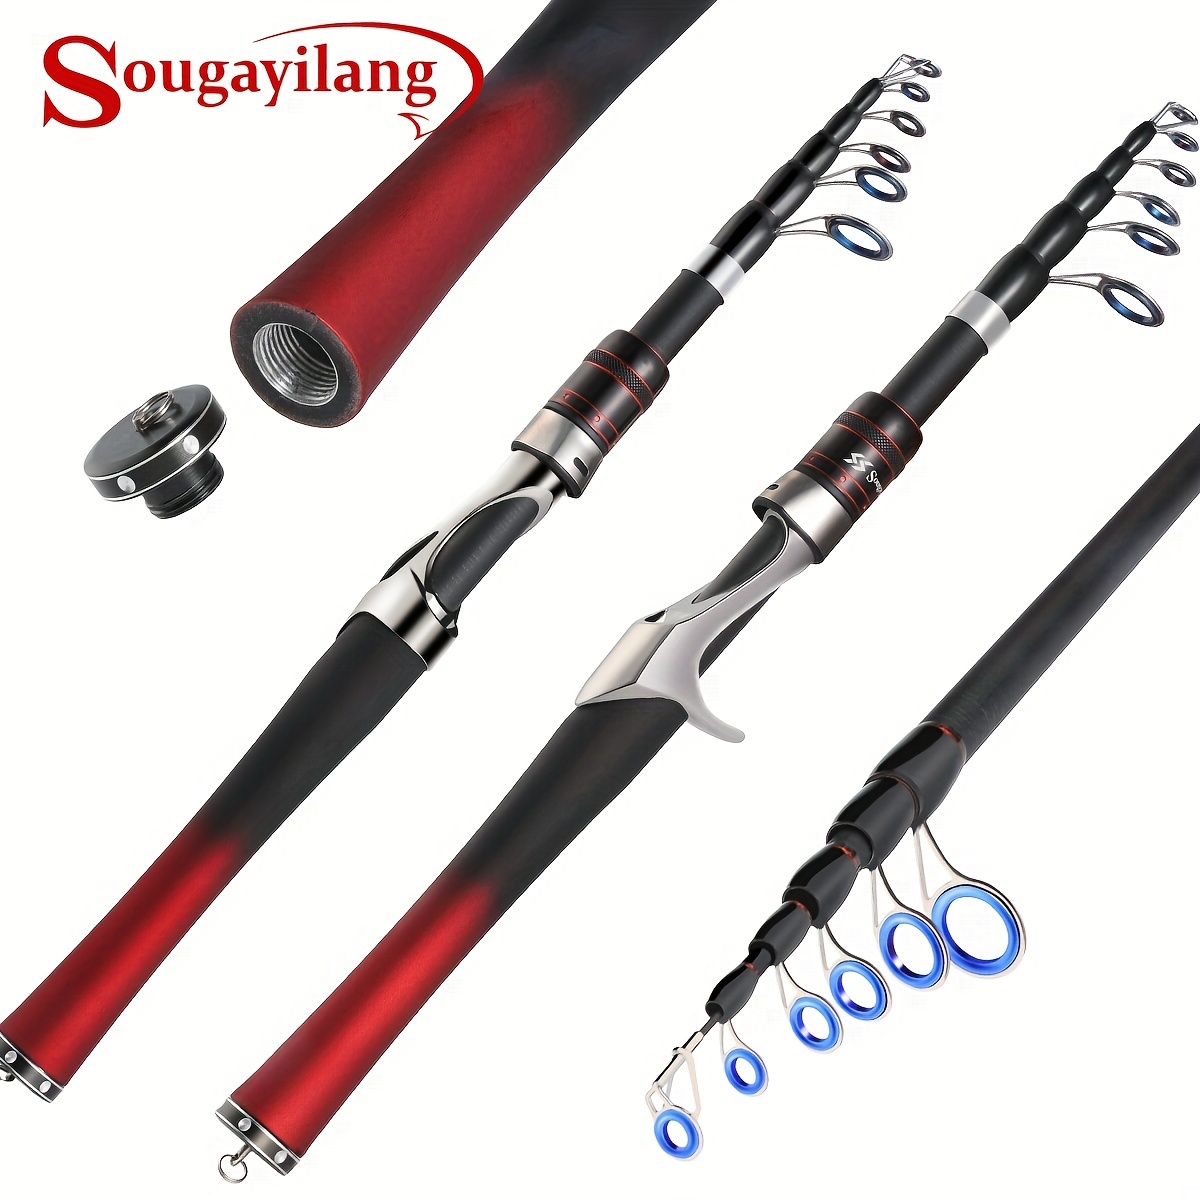 1pc Sougayilang Basic Type Red Fishing Rod, 5.25ft/1.6m Telescopic  Stainless Steel Spinning/Casting Rod, Fishing Tackle